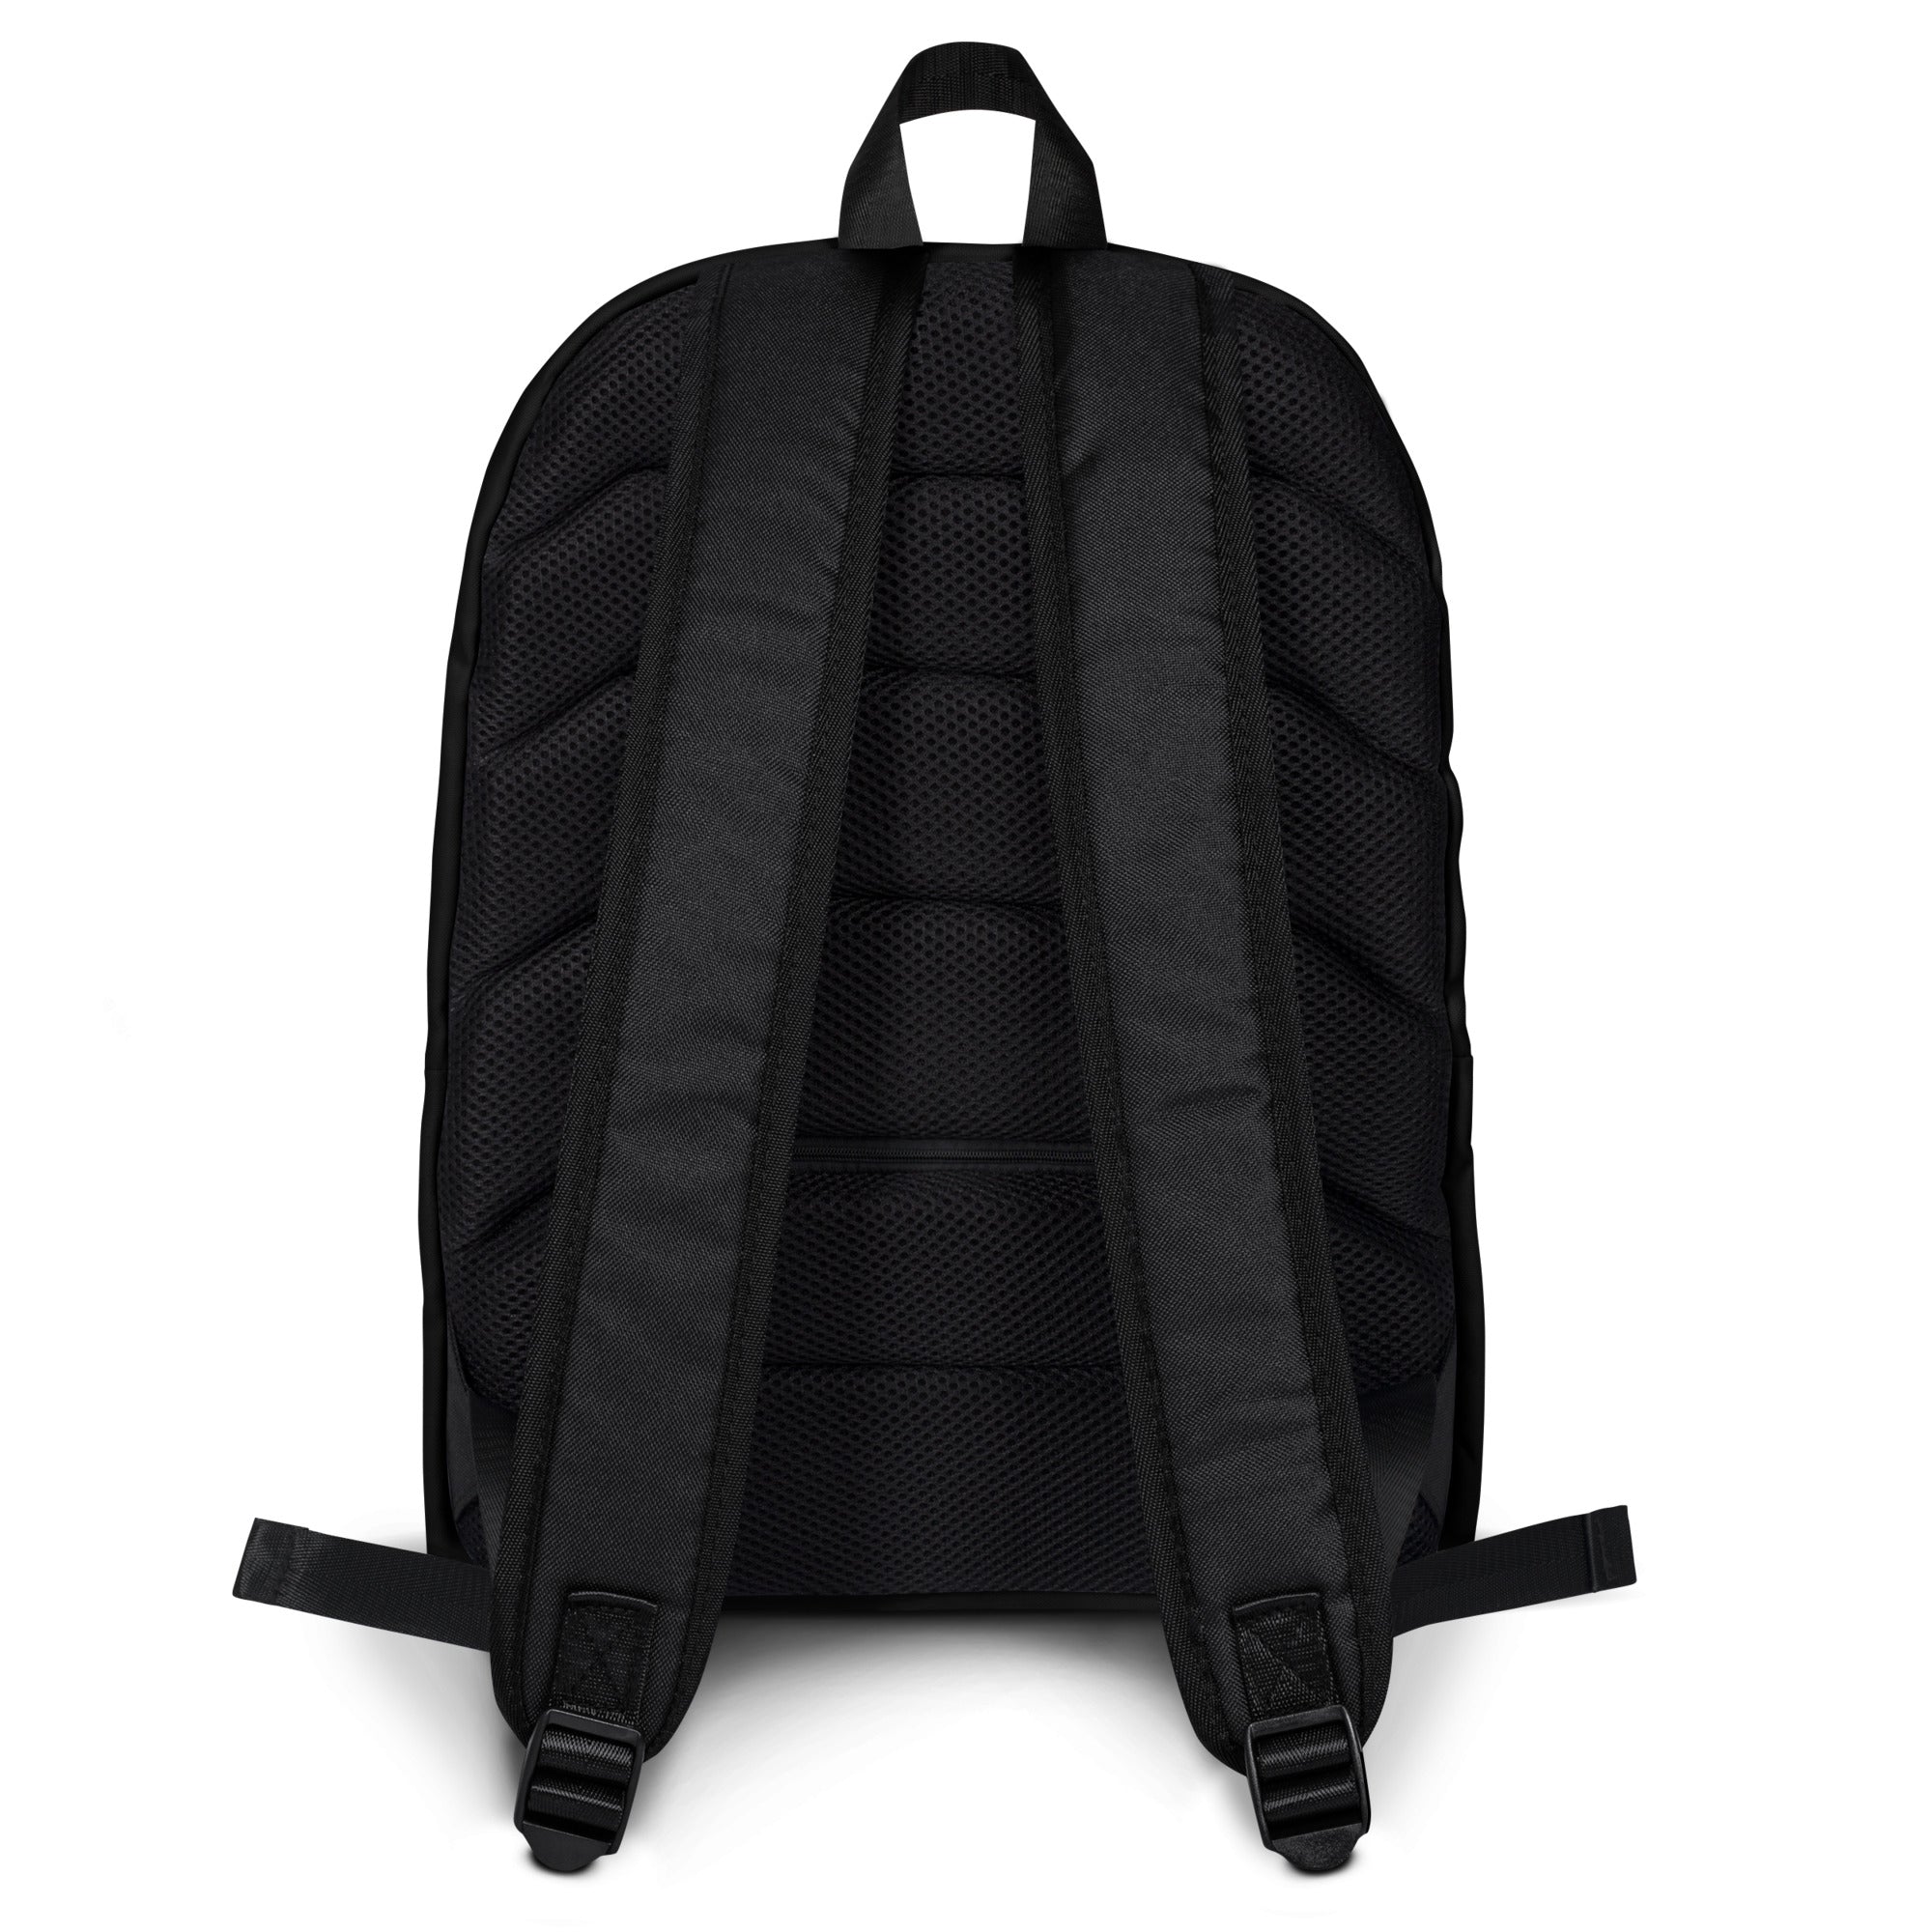 IVANA ONSTAGE Backpack